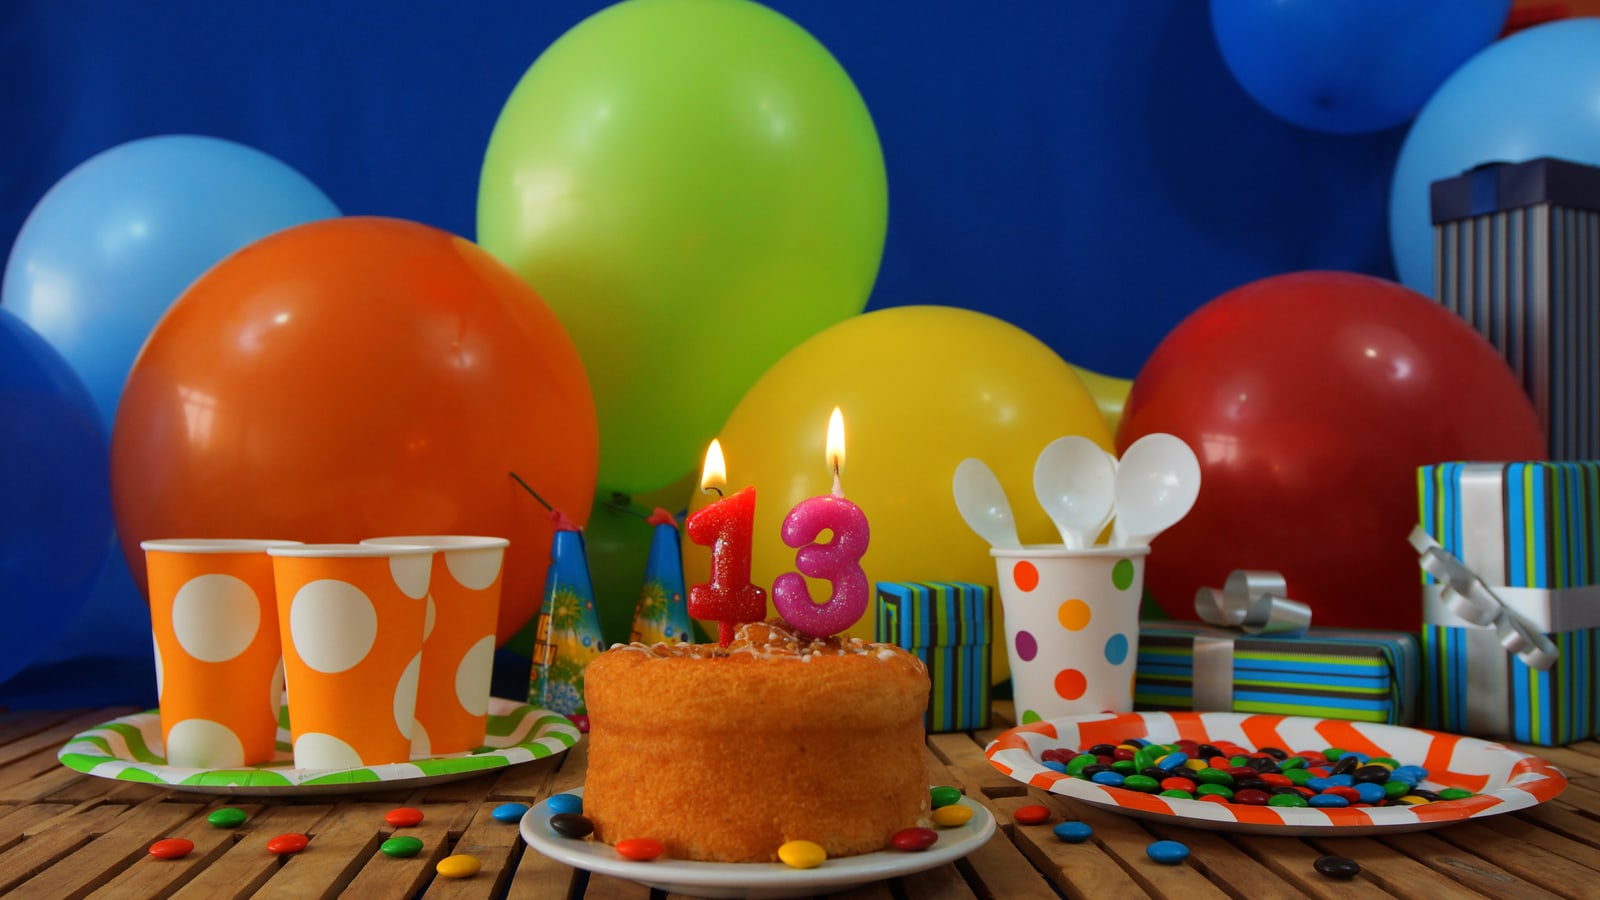 23 Unique Birthday Party Ideas for 13 Year Olds - ChildFun